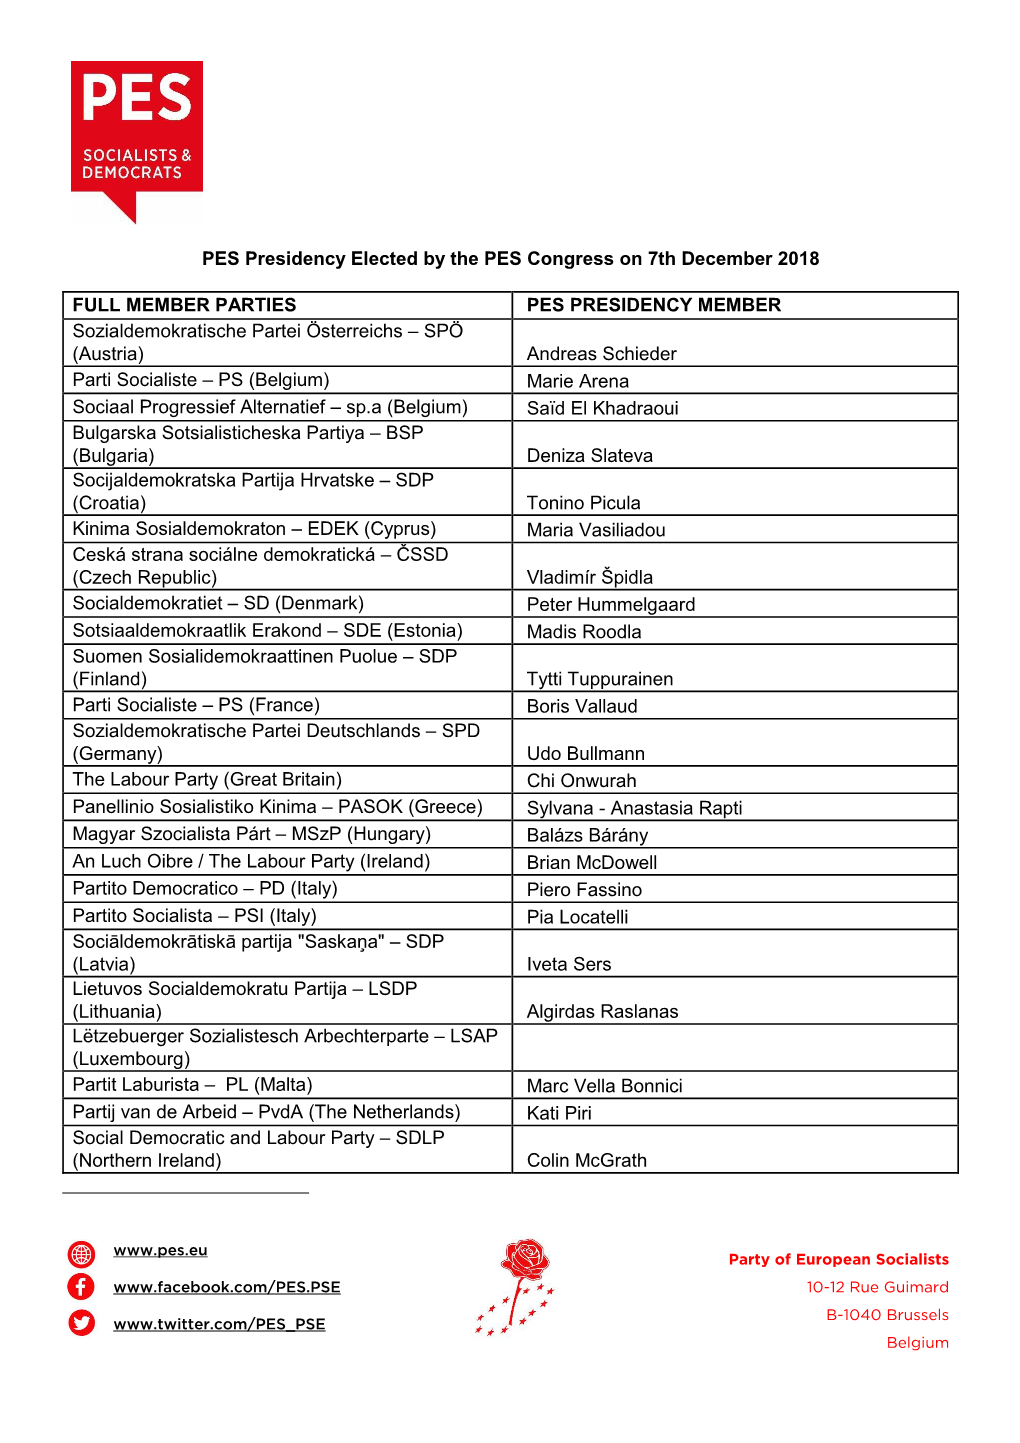 PES Presidency Elected by the PES Congress on 7Th December 2018